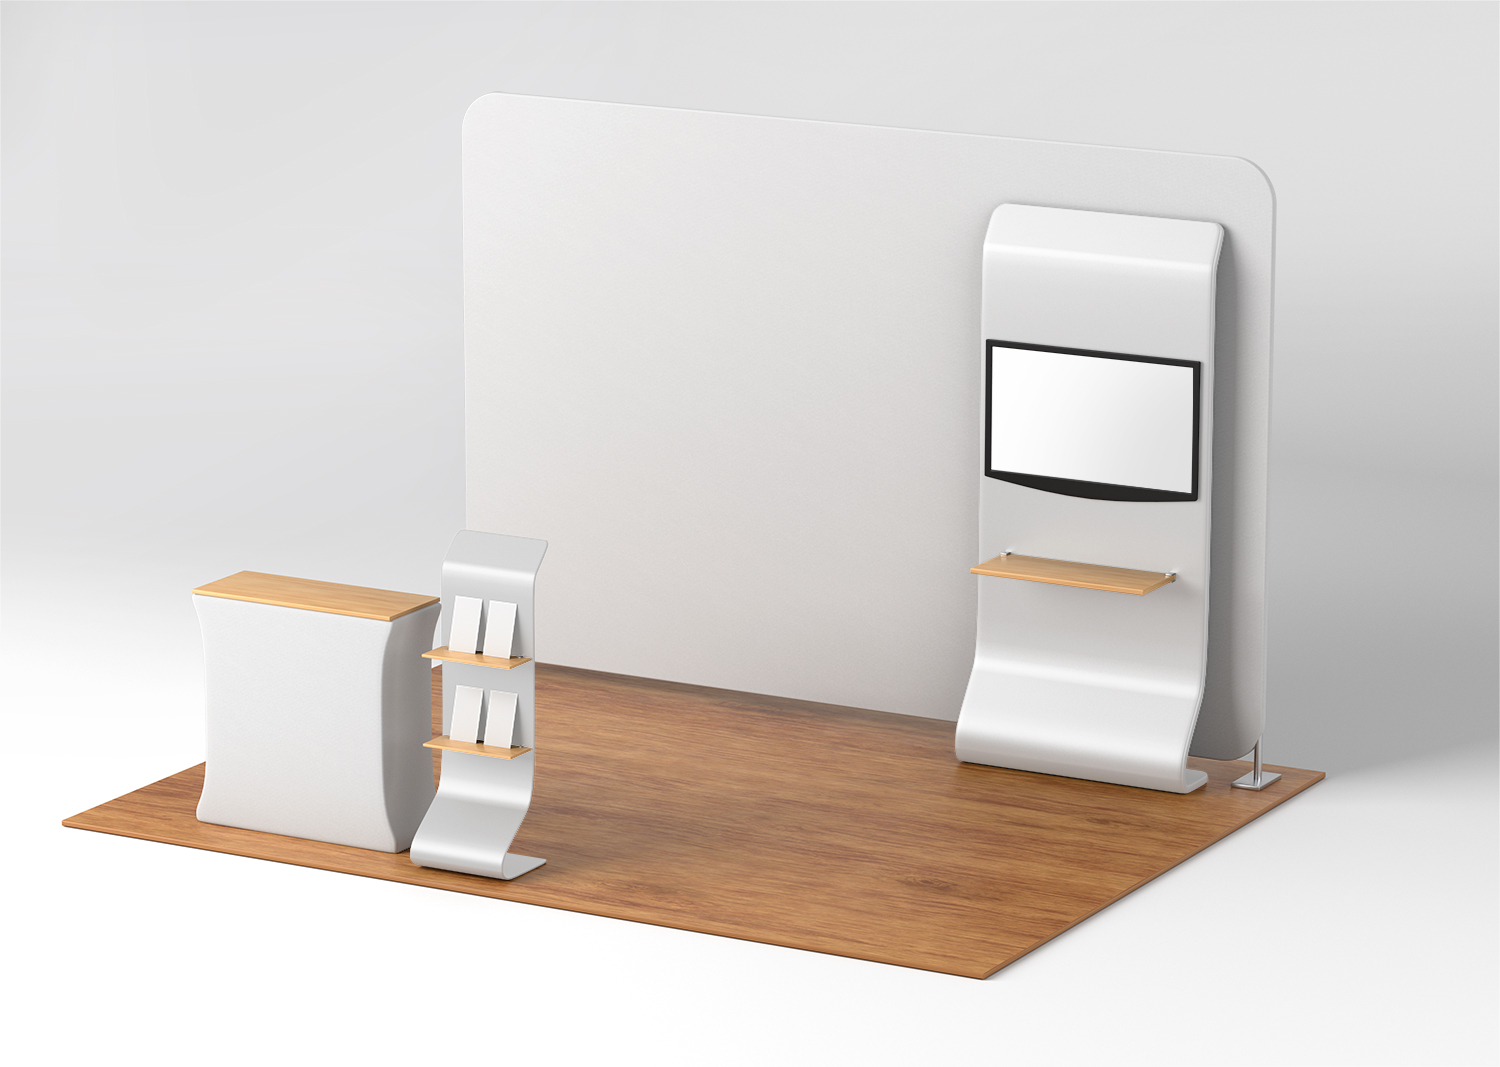 Trade Show Booth Free Mockup